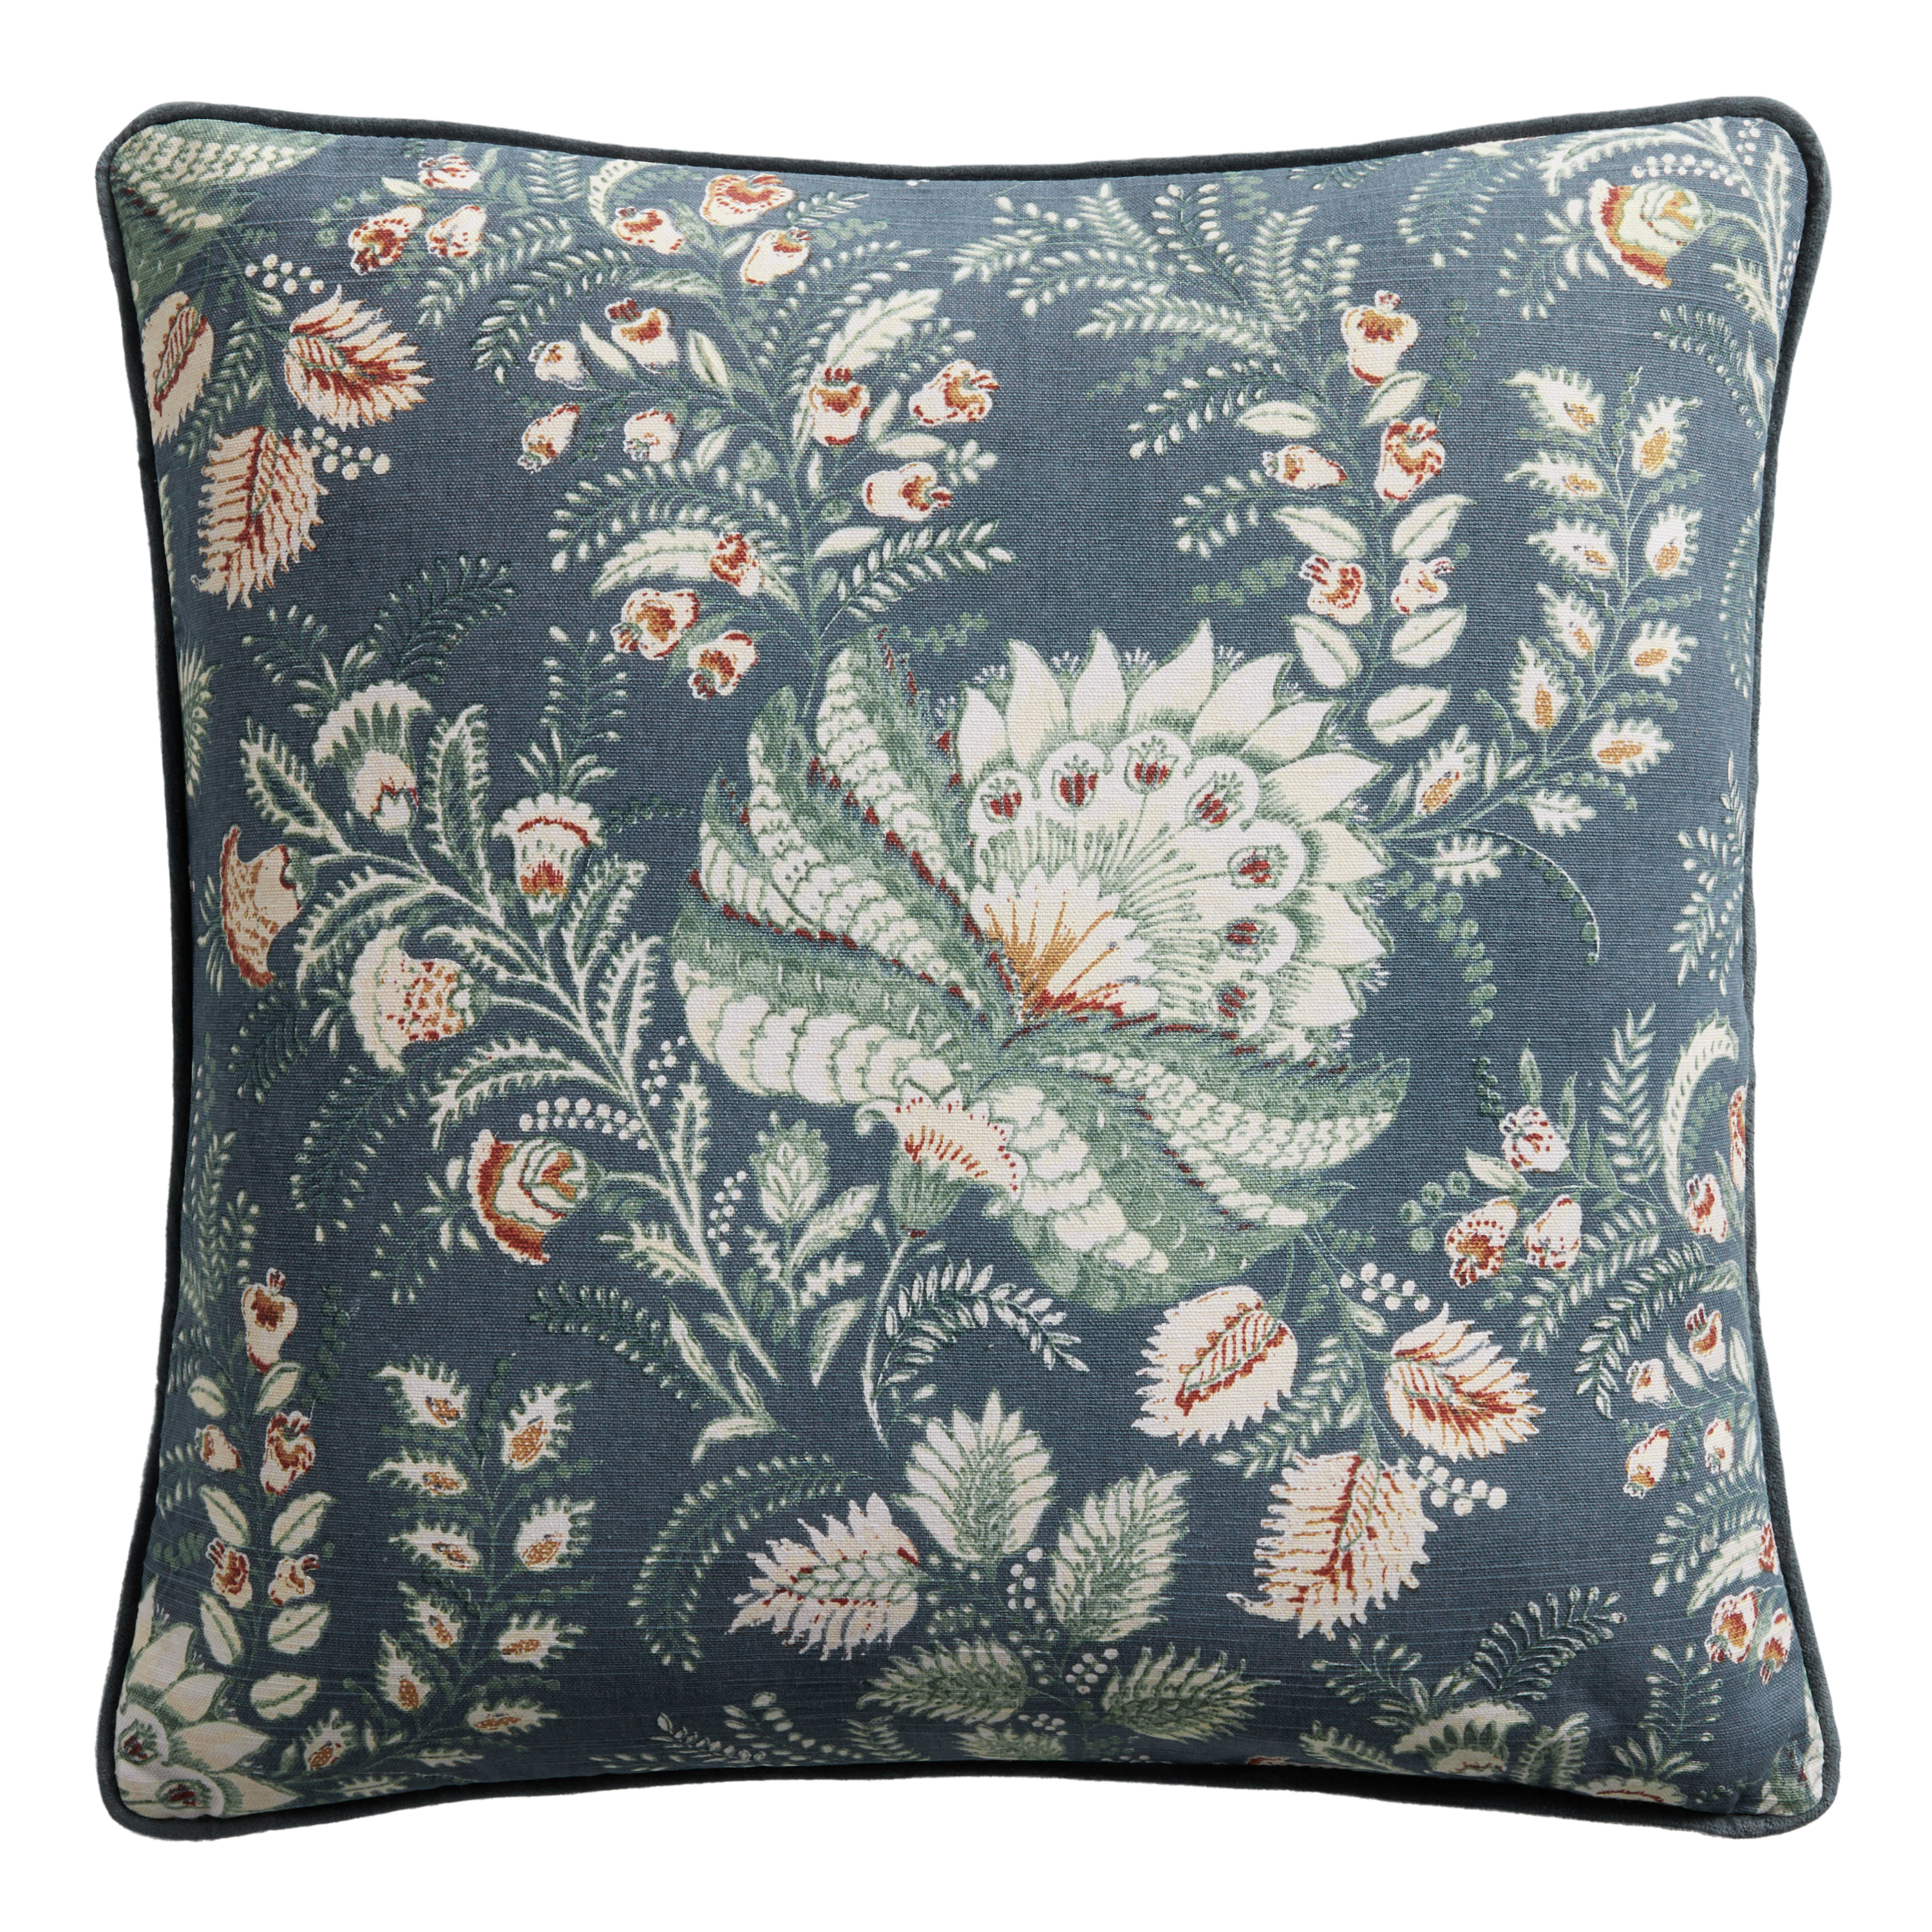 Decorative Pillows in Brooklyn Ocean Jacobean Floral Large Scale